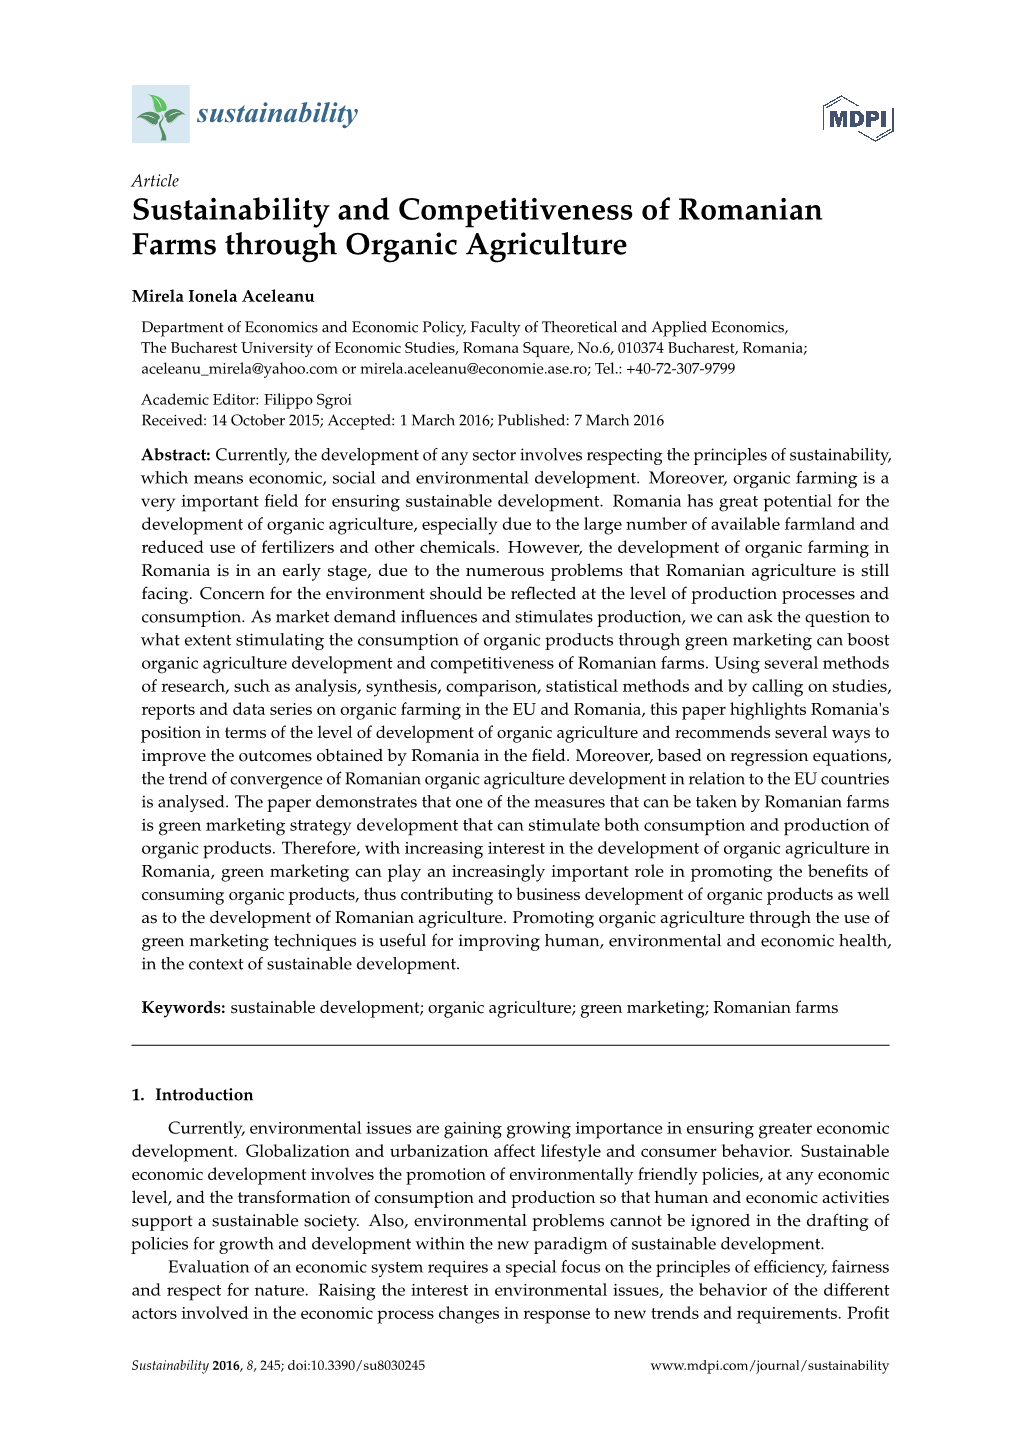 Sustainability and Competitiveness of Romanian Farms Through Organic Agriculture